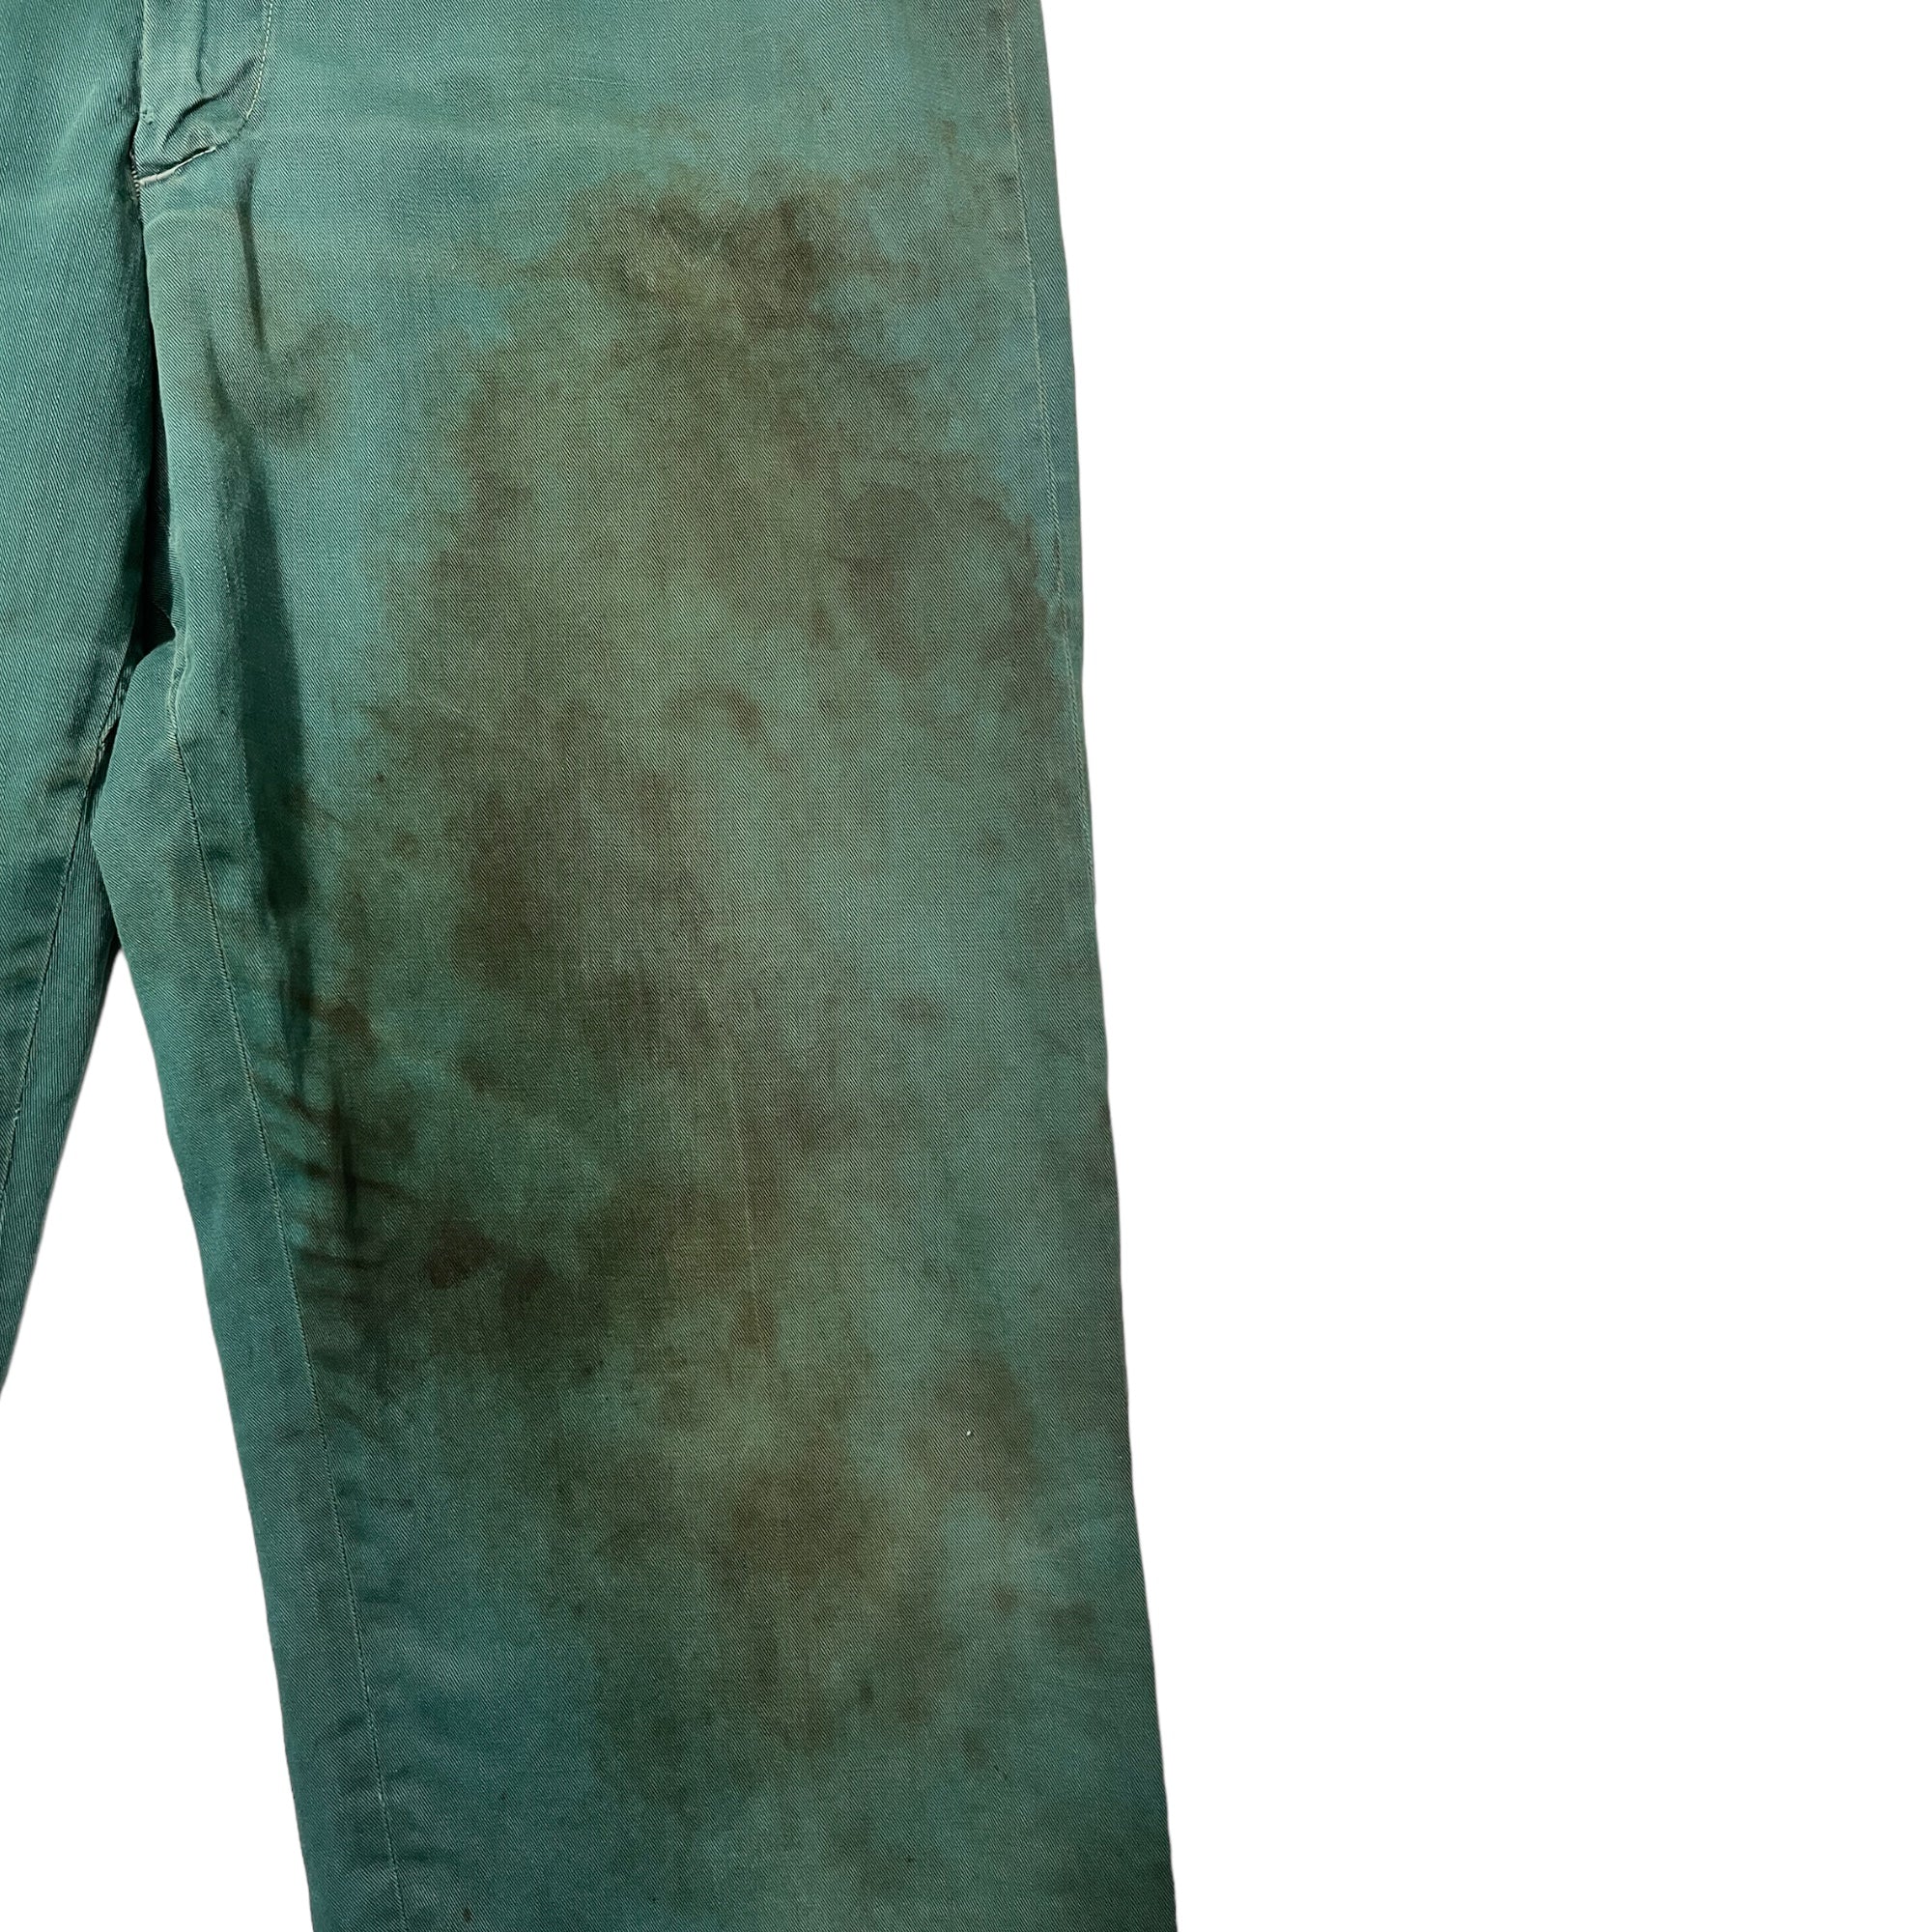 1950s Distressed Hercules Work Trousers - Faded Green - 36x32